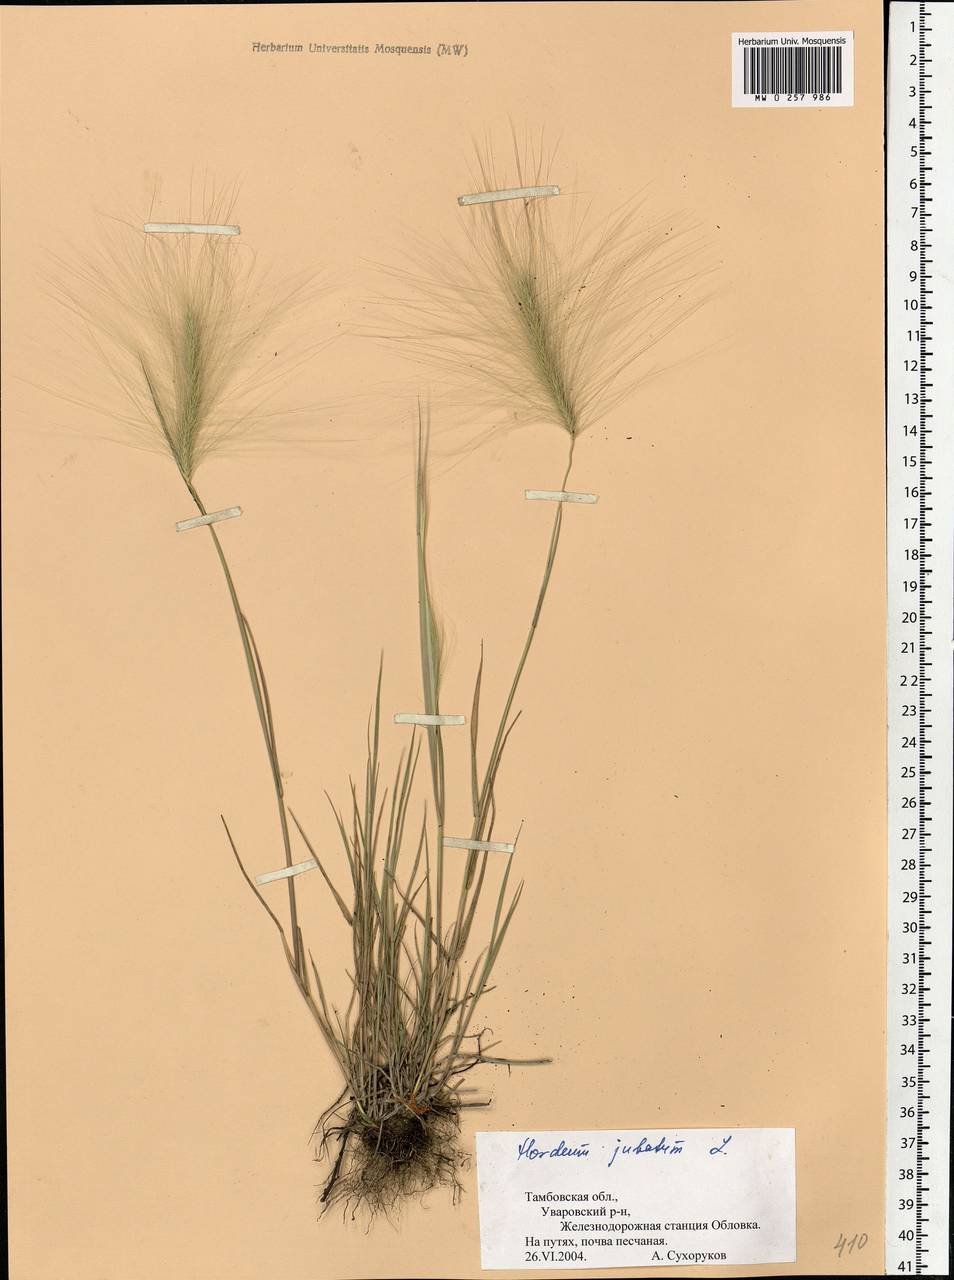 Hordeum jubatum L., Eastern Europe, Central forest-and-steppe region (E6) (Russia)